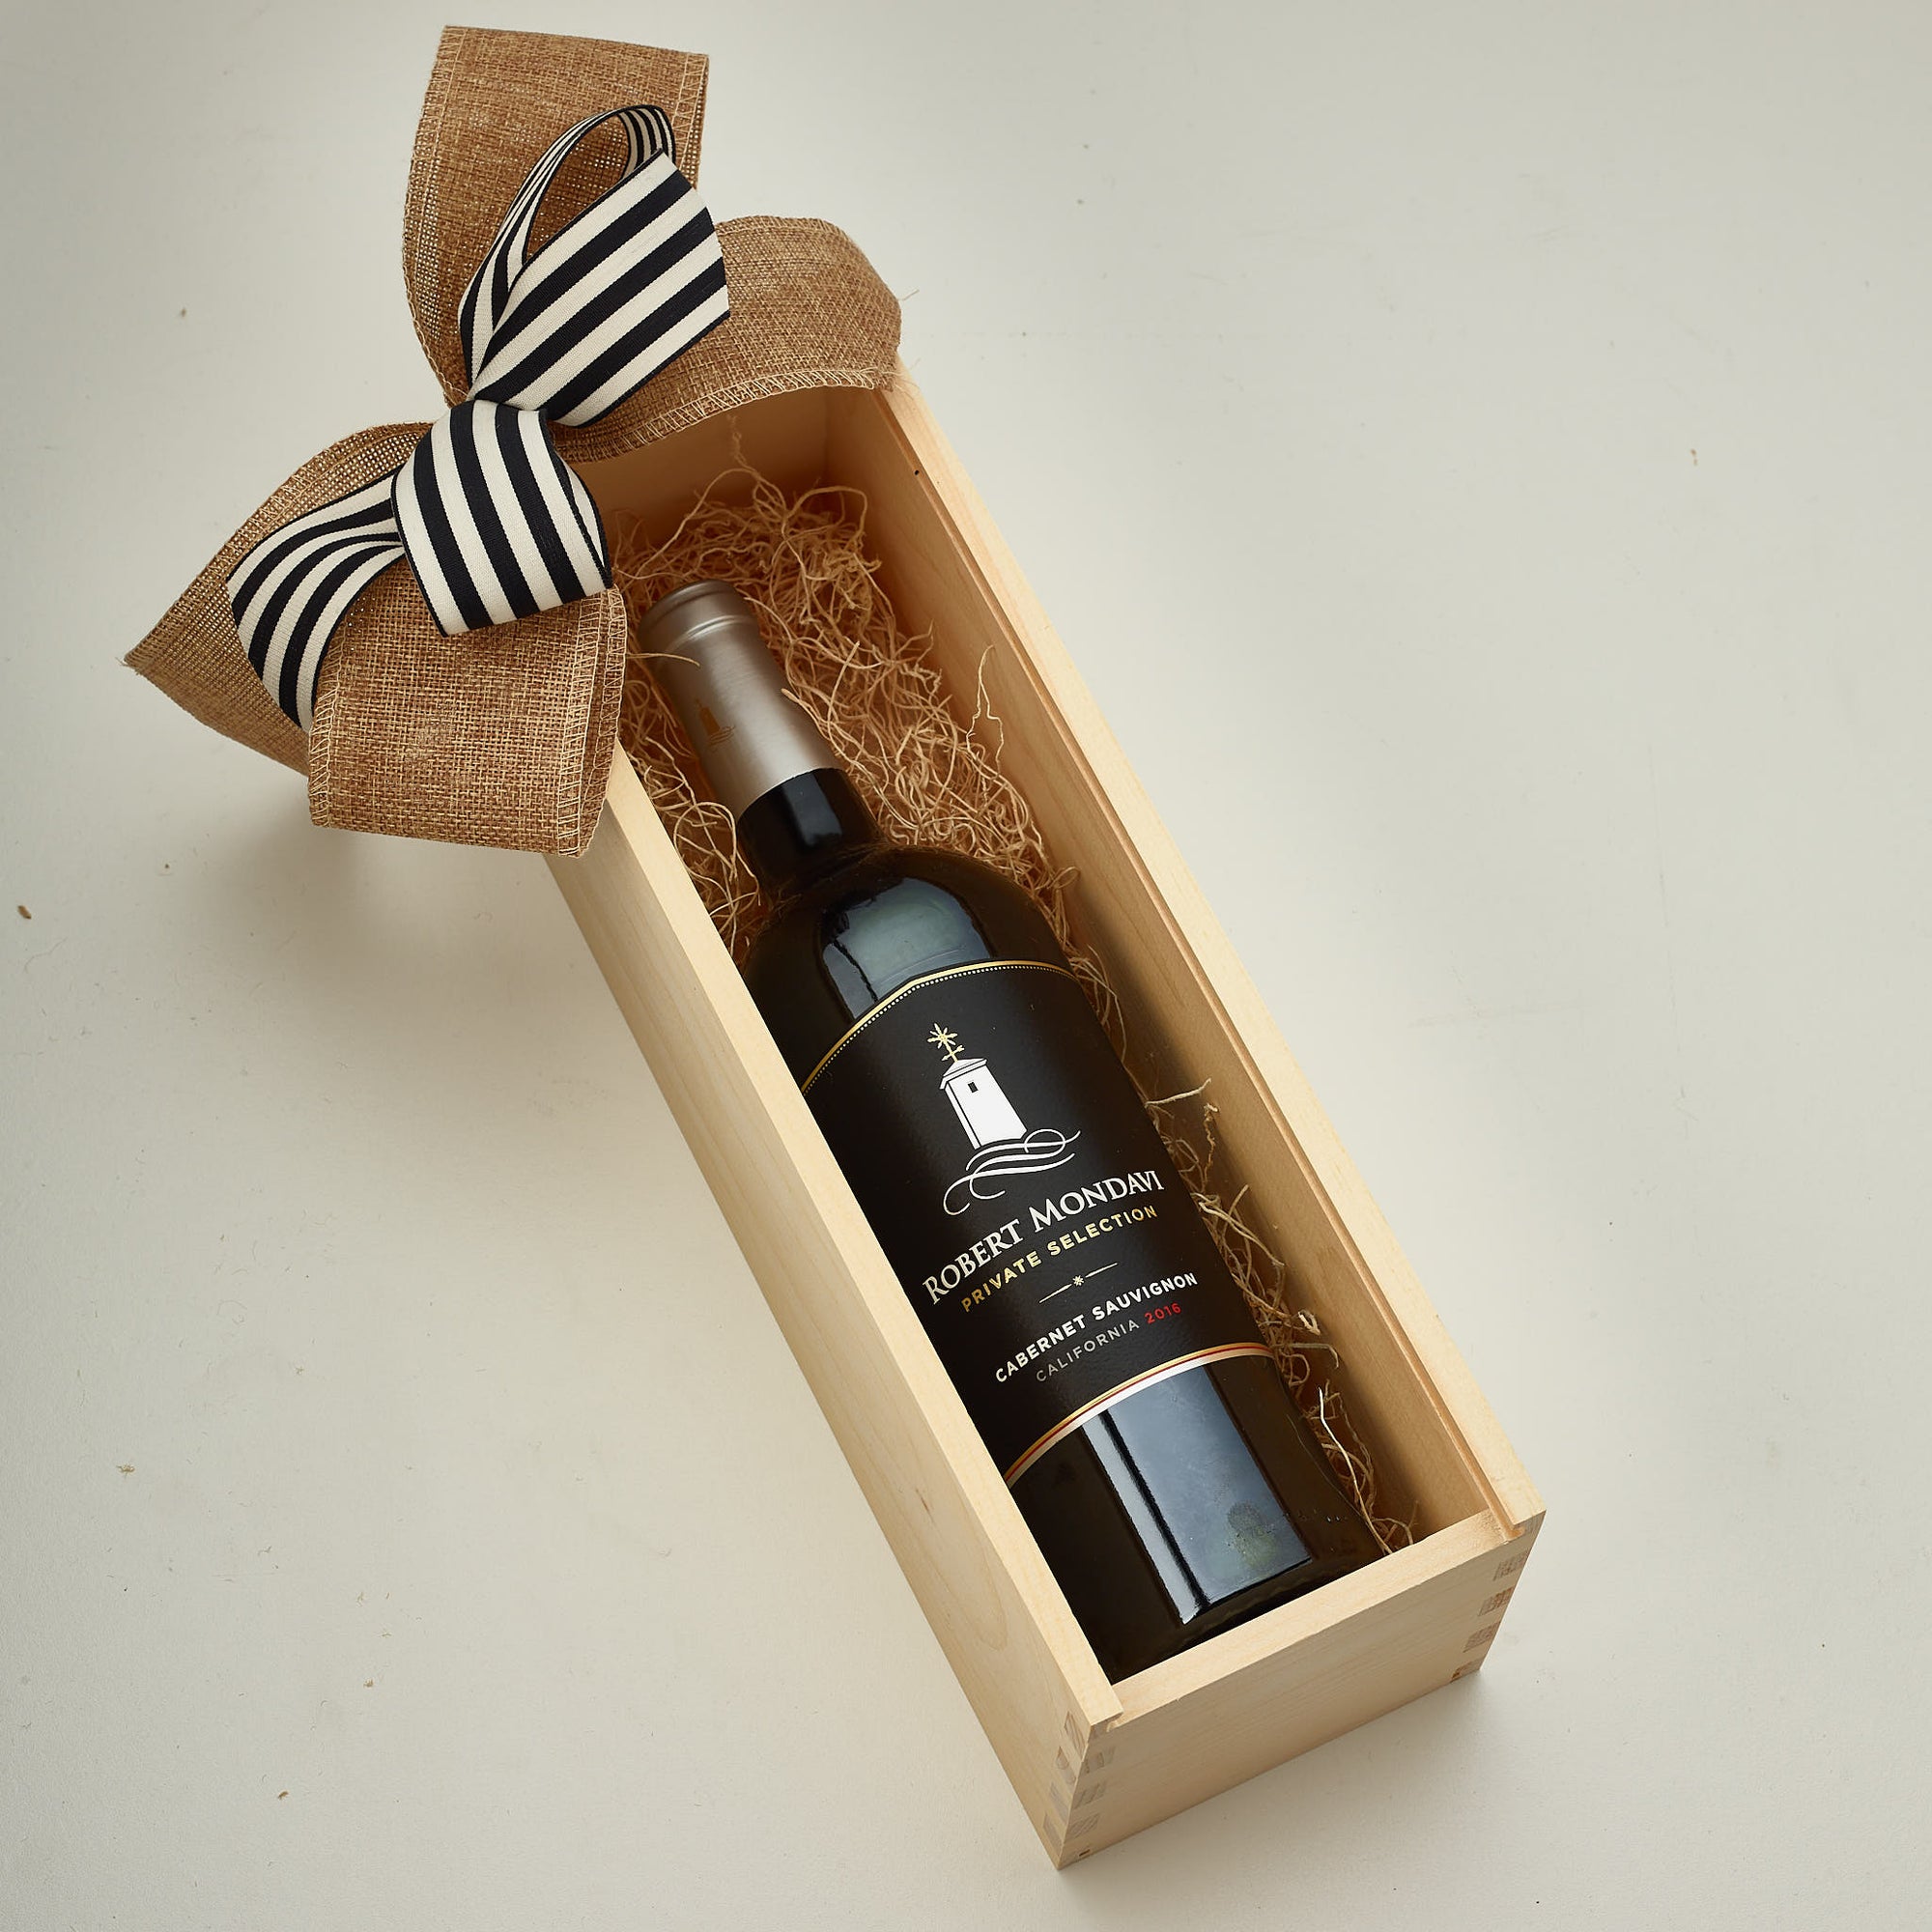 Premium Red Cabernet Wine in The Box Gift